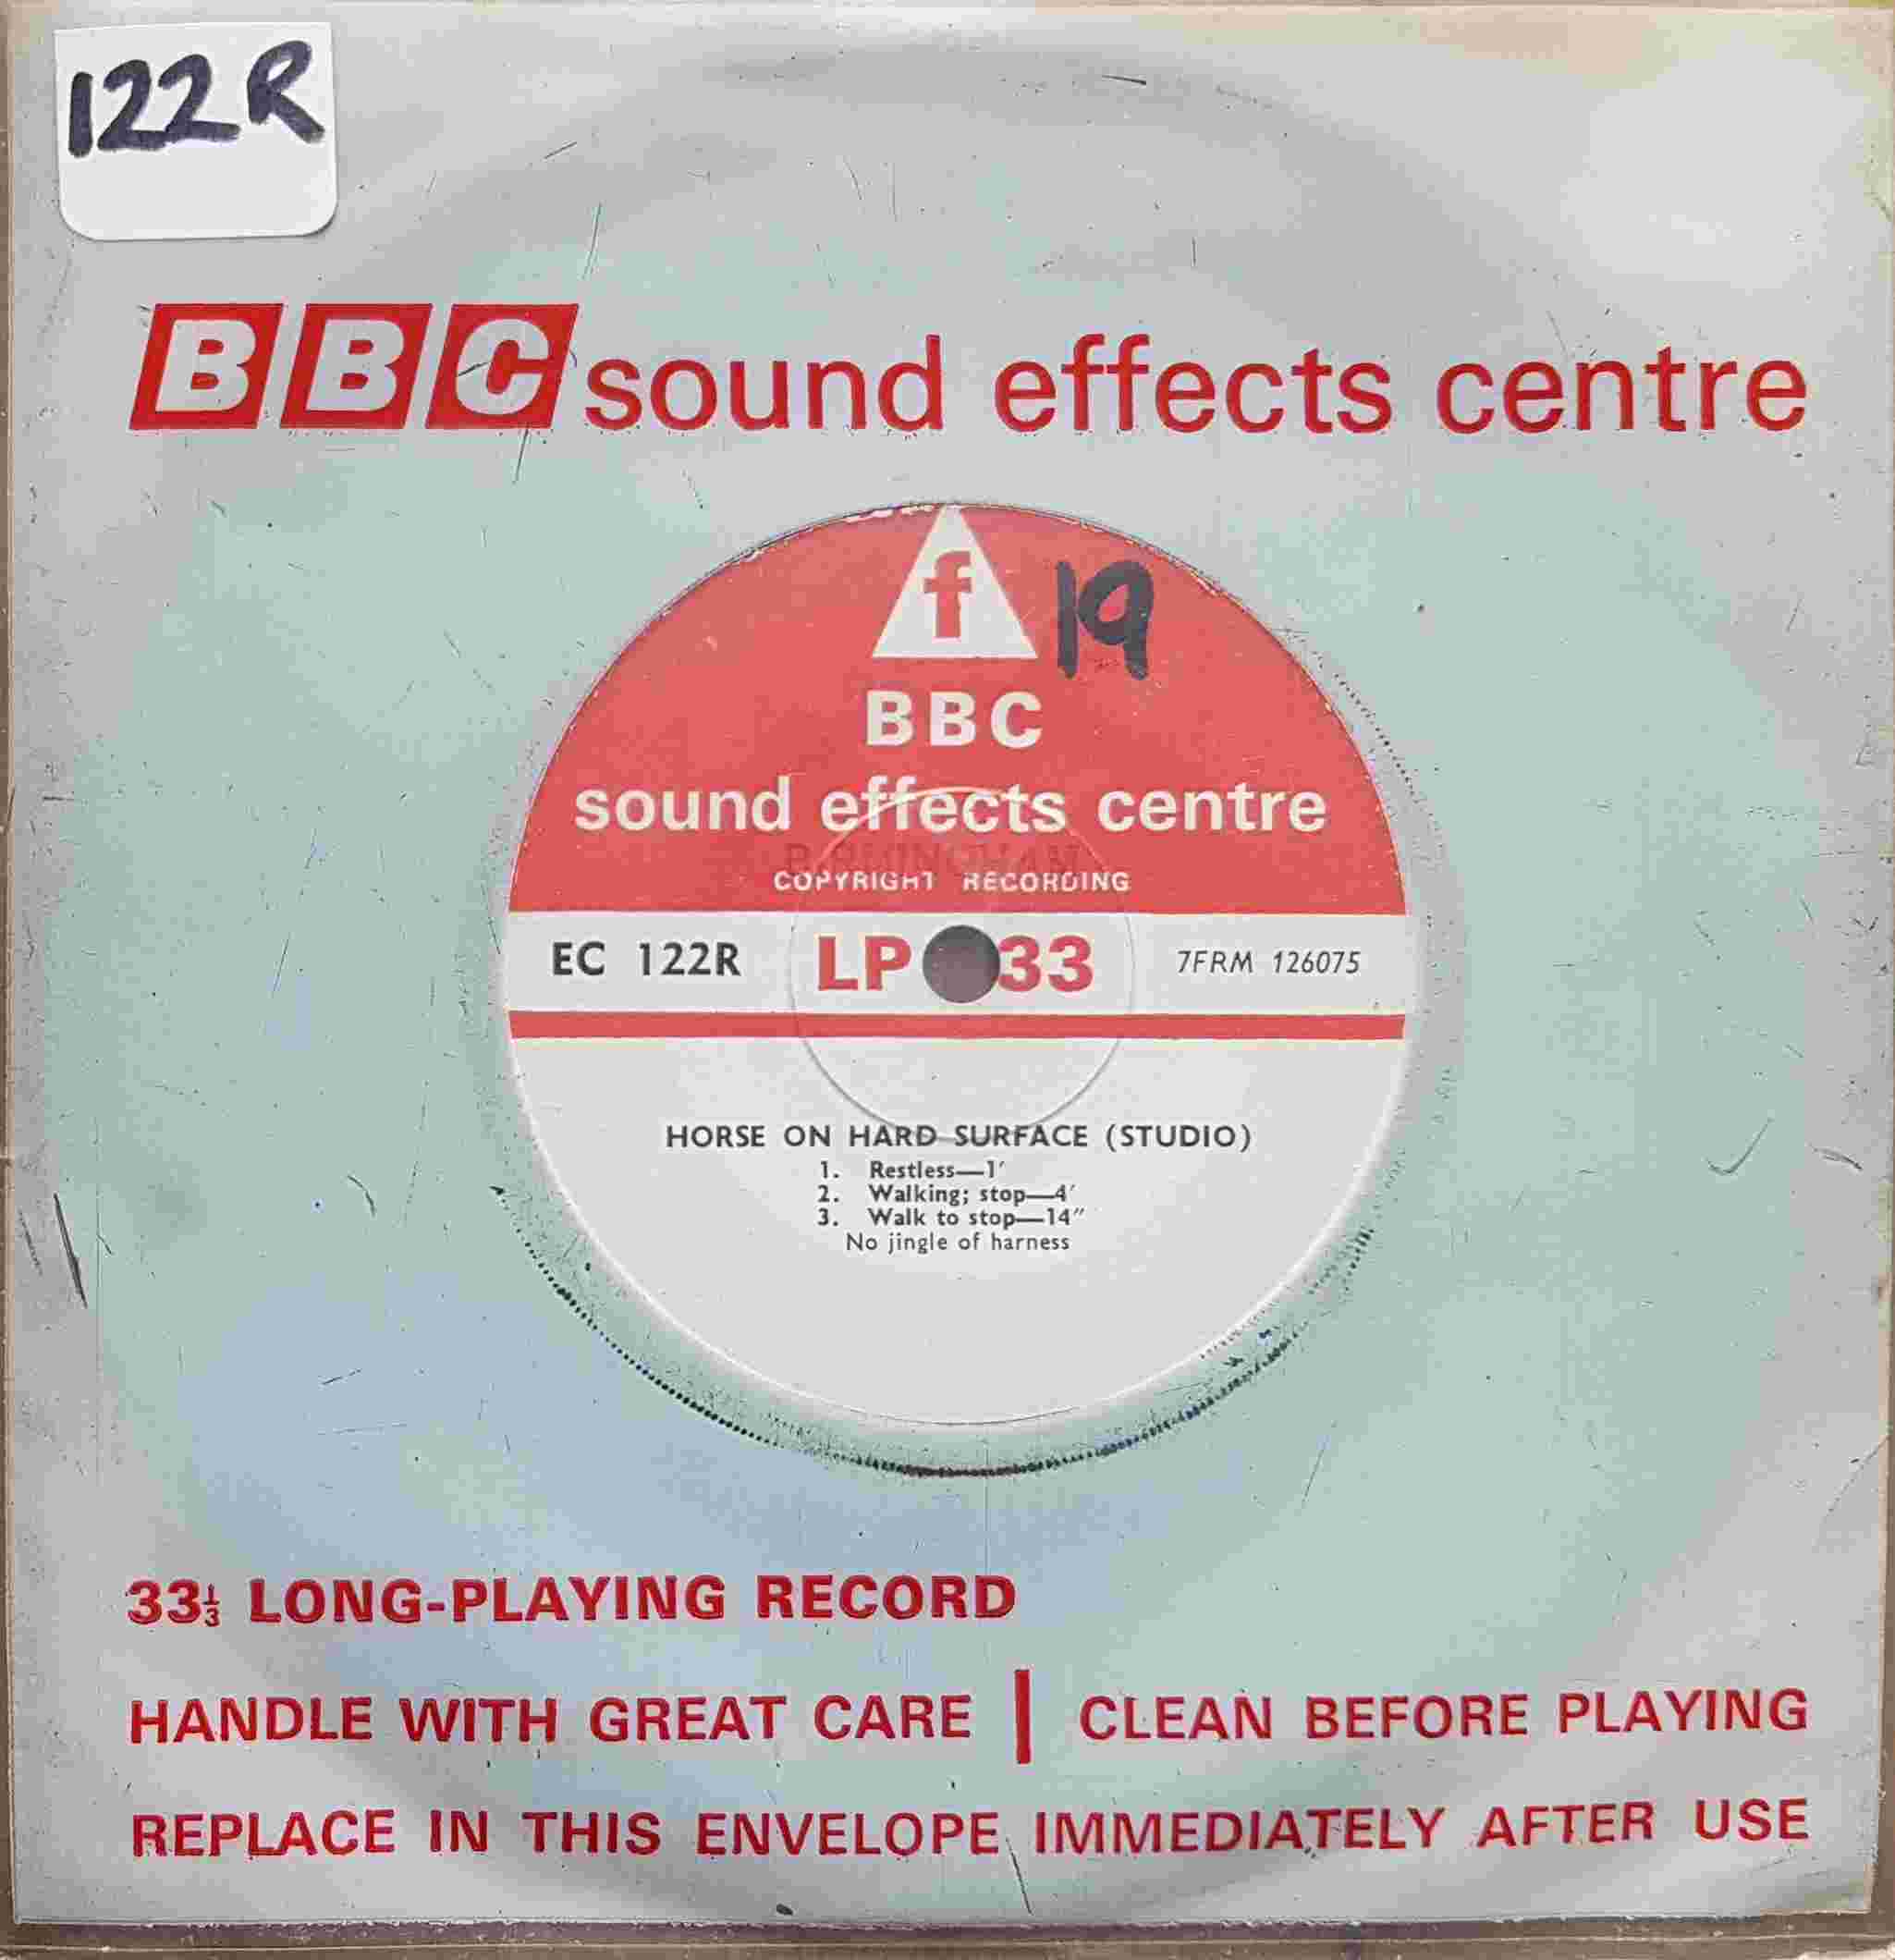 Picture of EC 122R Horse on hard surface (Studio) - No jingle or harness by artist Not registered from the BBC records and Tapes library